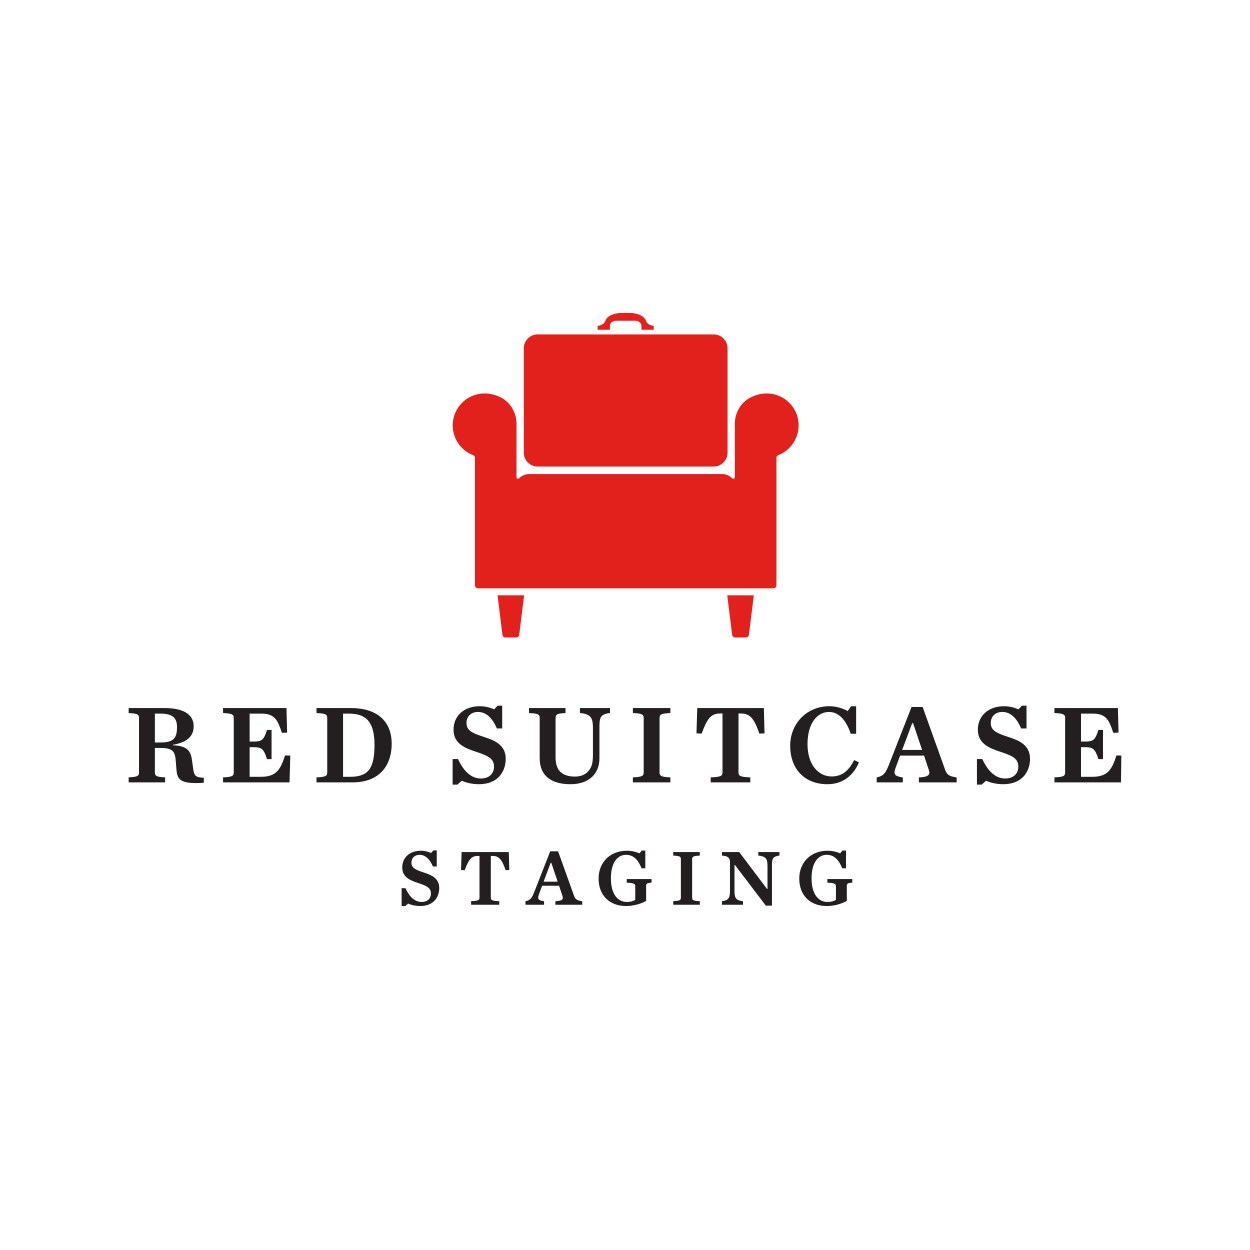 Red Suitcase Staging logo design by logo designer Lewis Communications Nashville for your inspiration and for the worlds largest logo competition